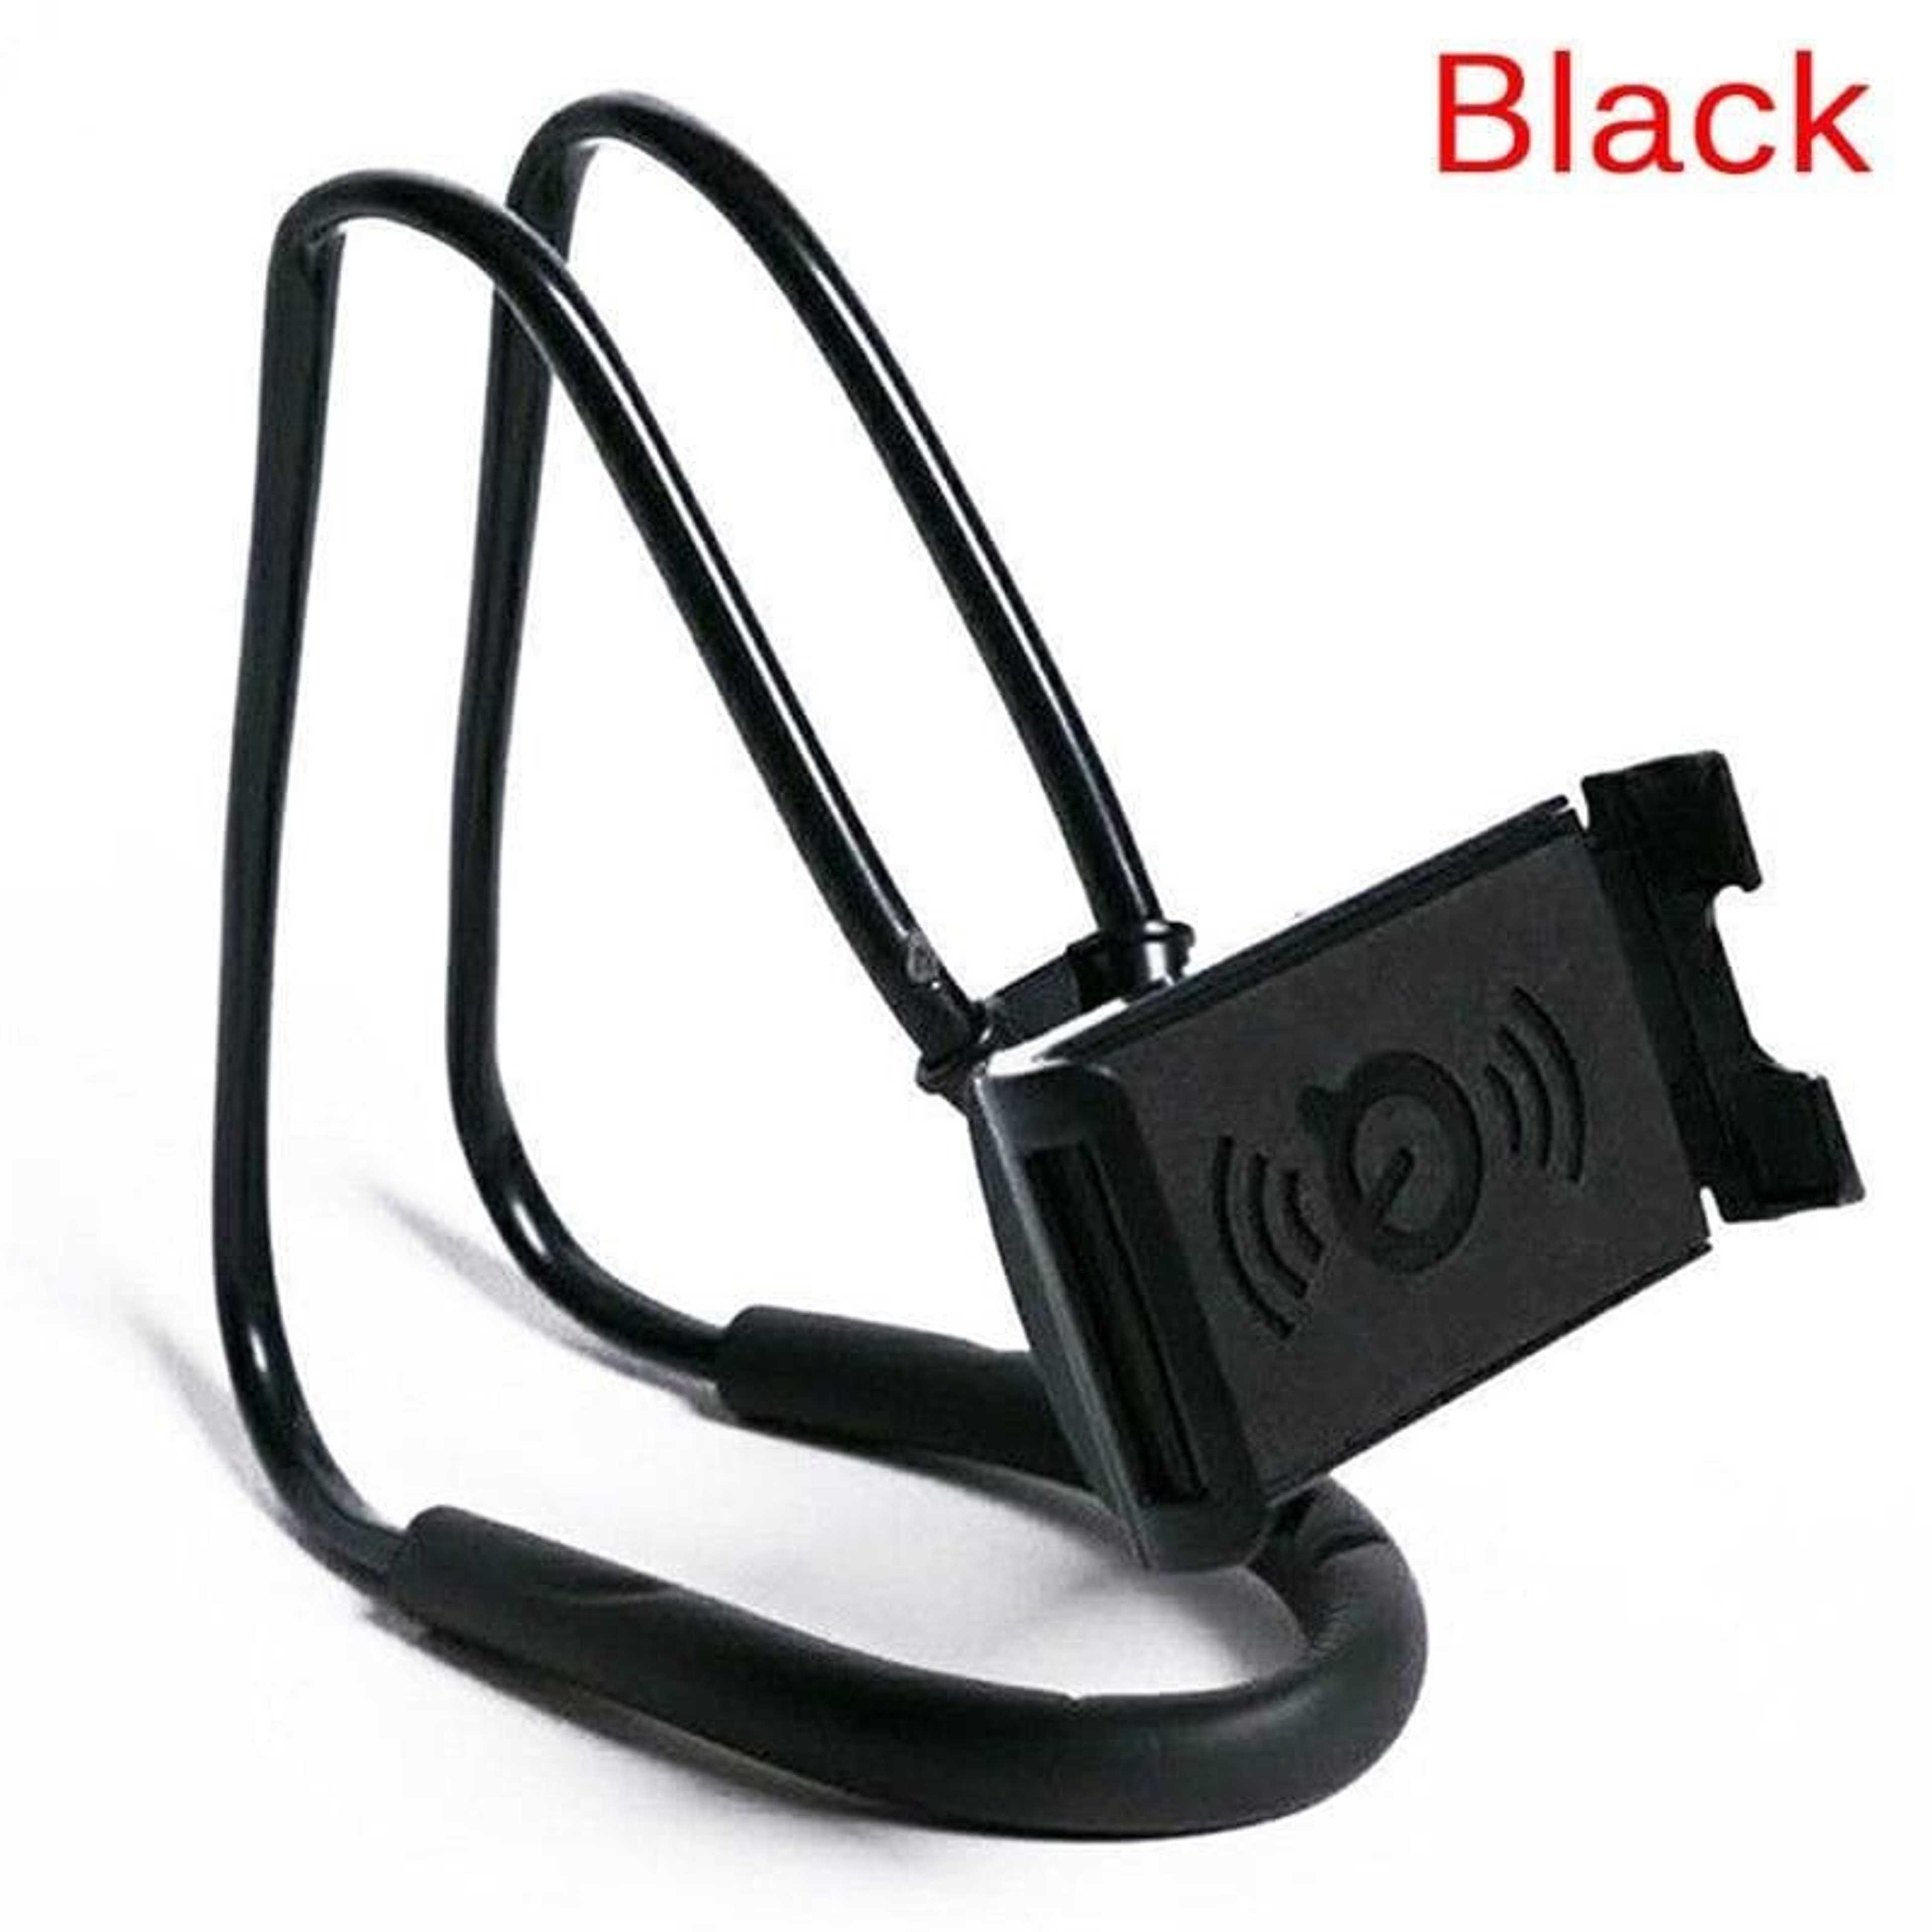 Title: Flexible Lazy Hanging Neck Phone Stand Cellphone Support Bracket Universal Holder For Phones